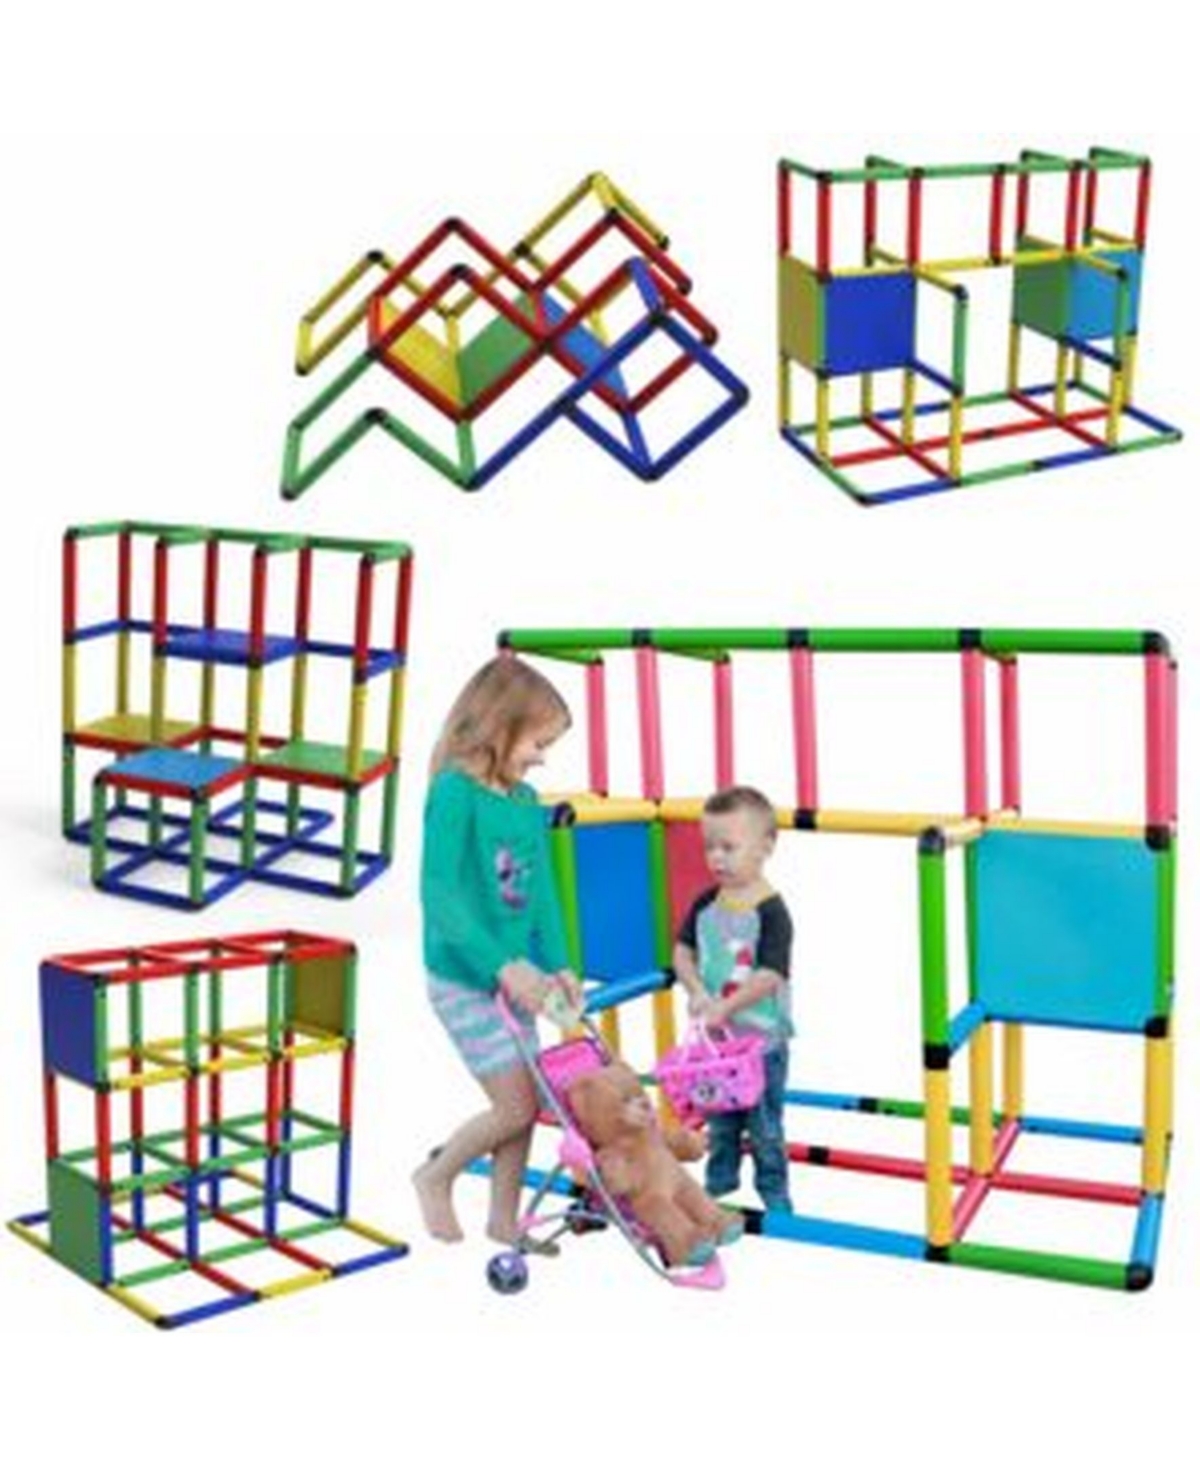 Funphix Classic Construction Toy Set, 316 Pieces In Multi